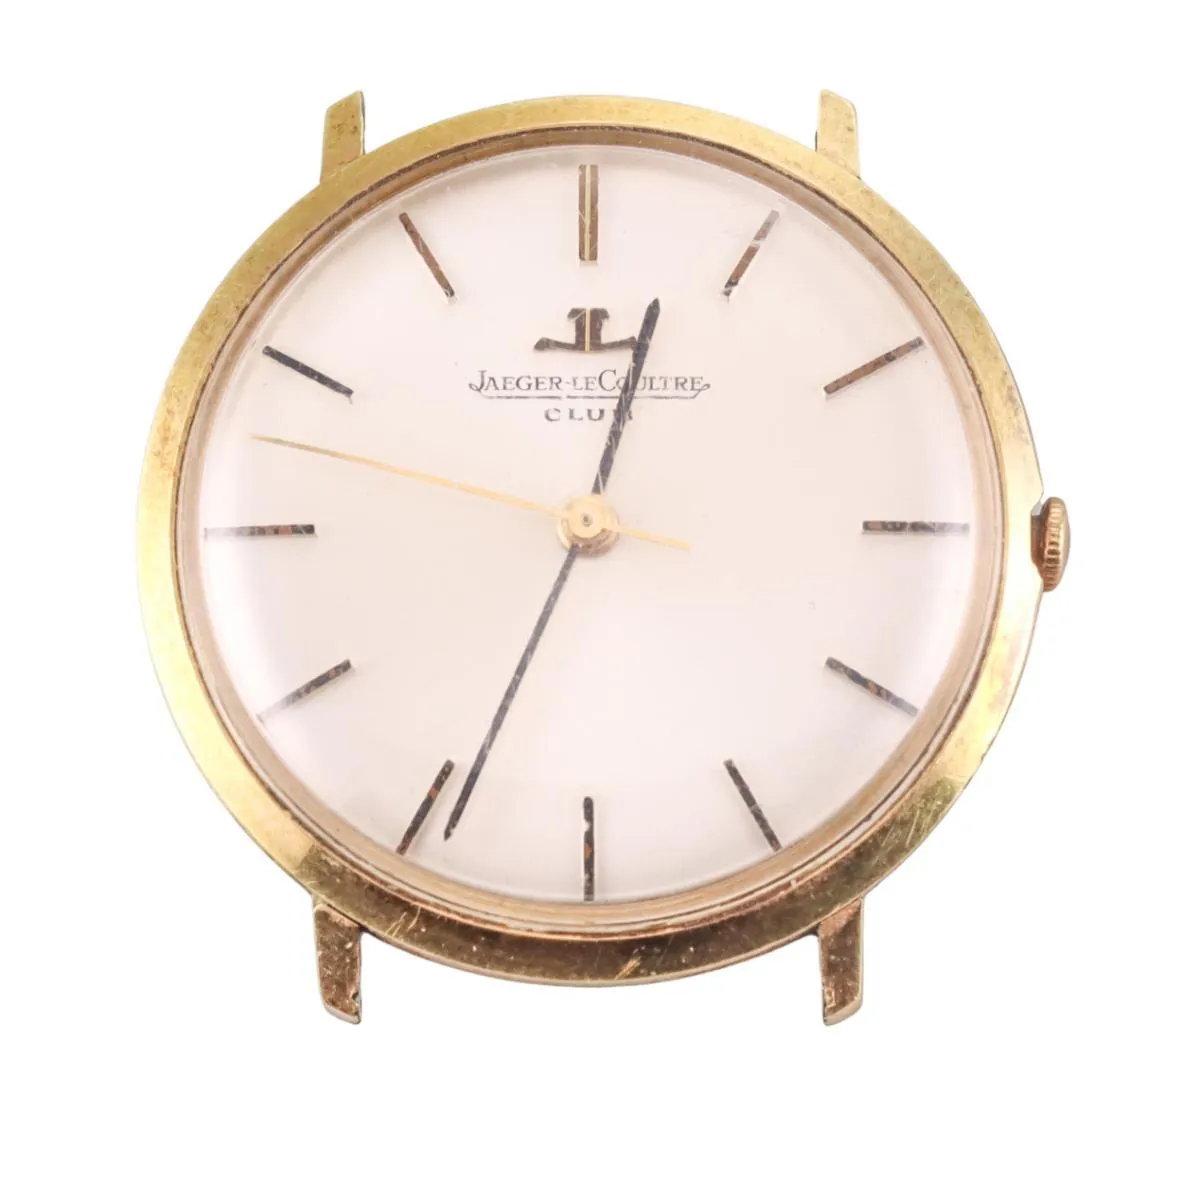 Jaeger-LeCoultre Club 200306 33mm Gold plated with stainless steel